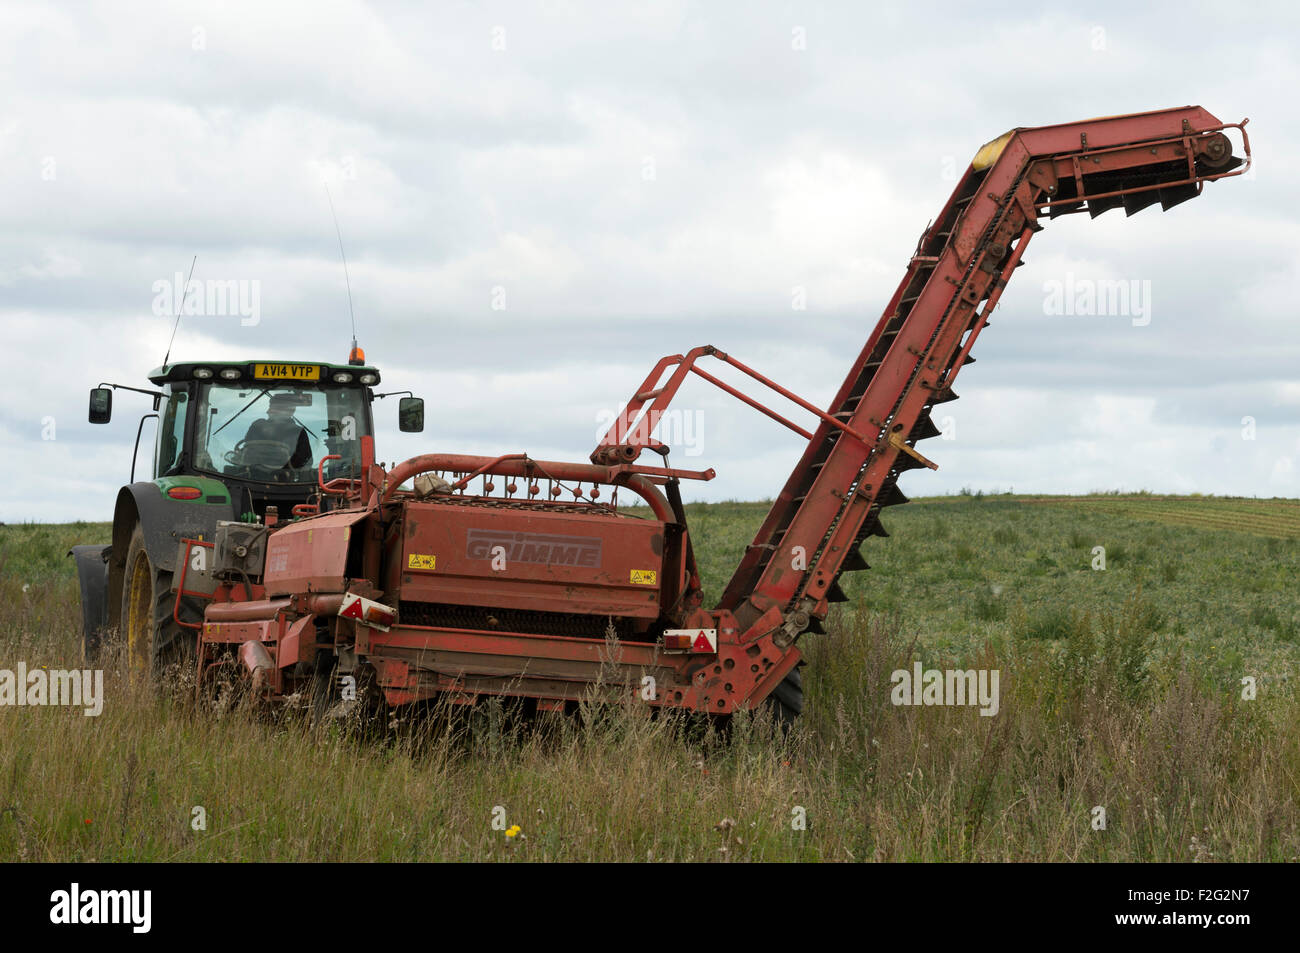 Grimme harvester Stock Photo